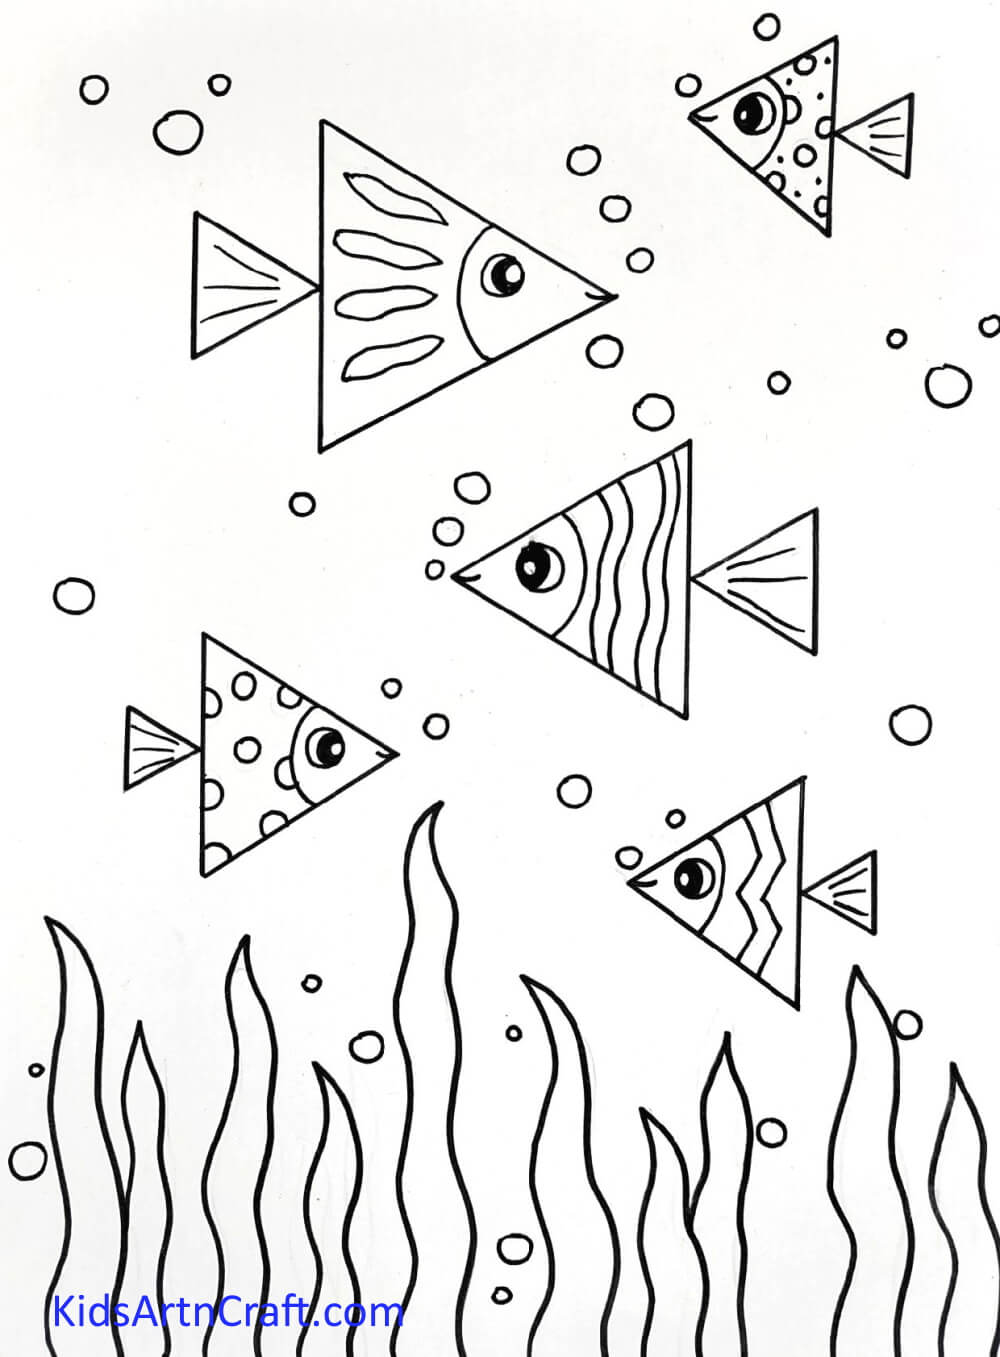 Drawing Grass And Water Bubbles - Create a Triangle Fish with this Step-by-Step Guide